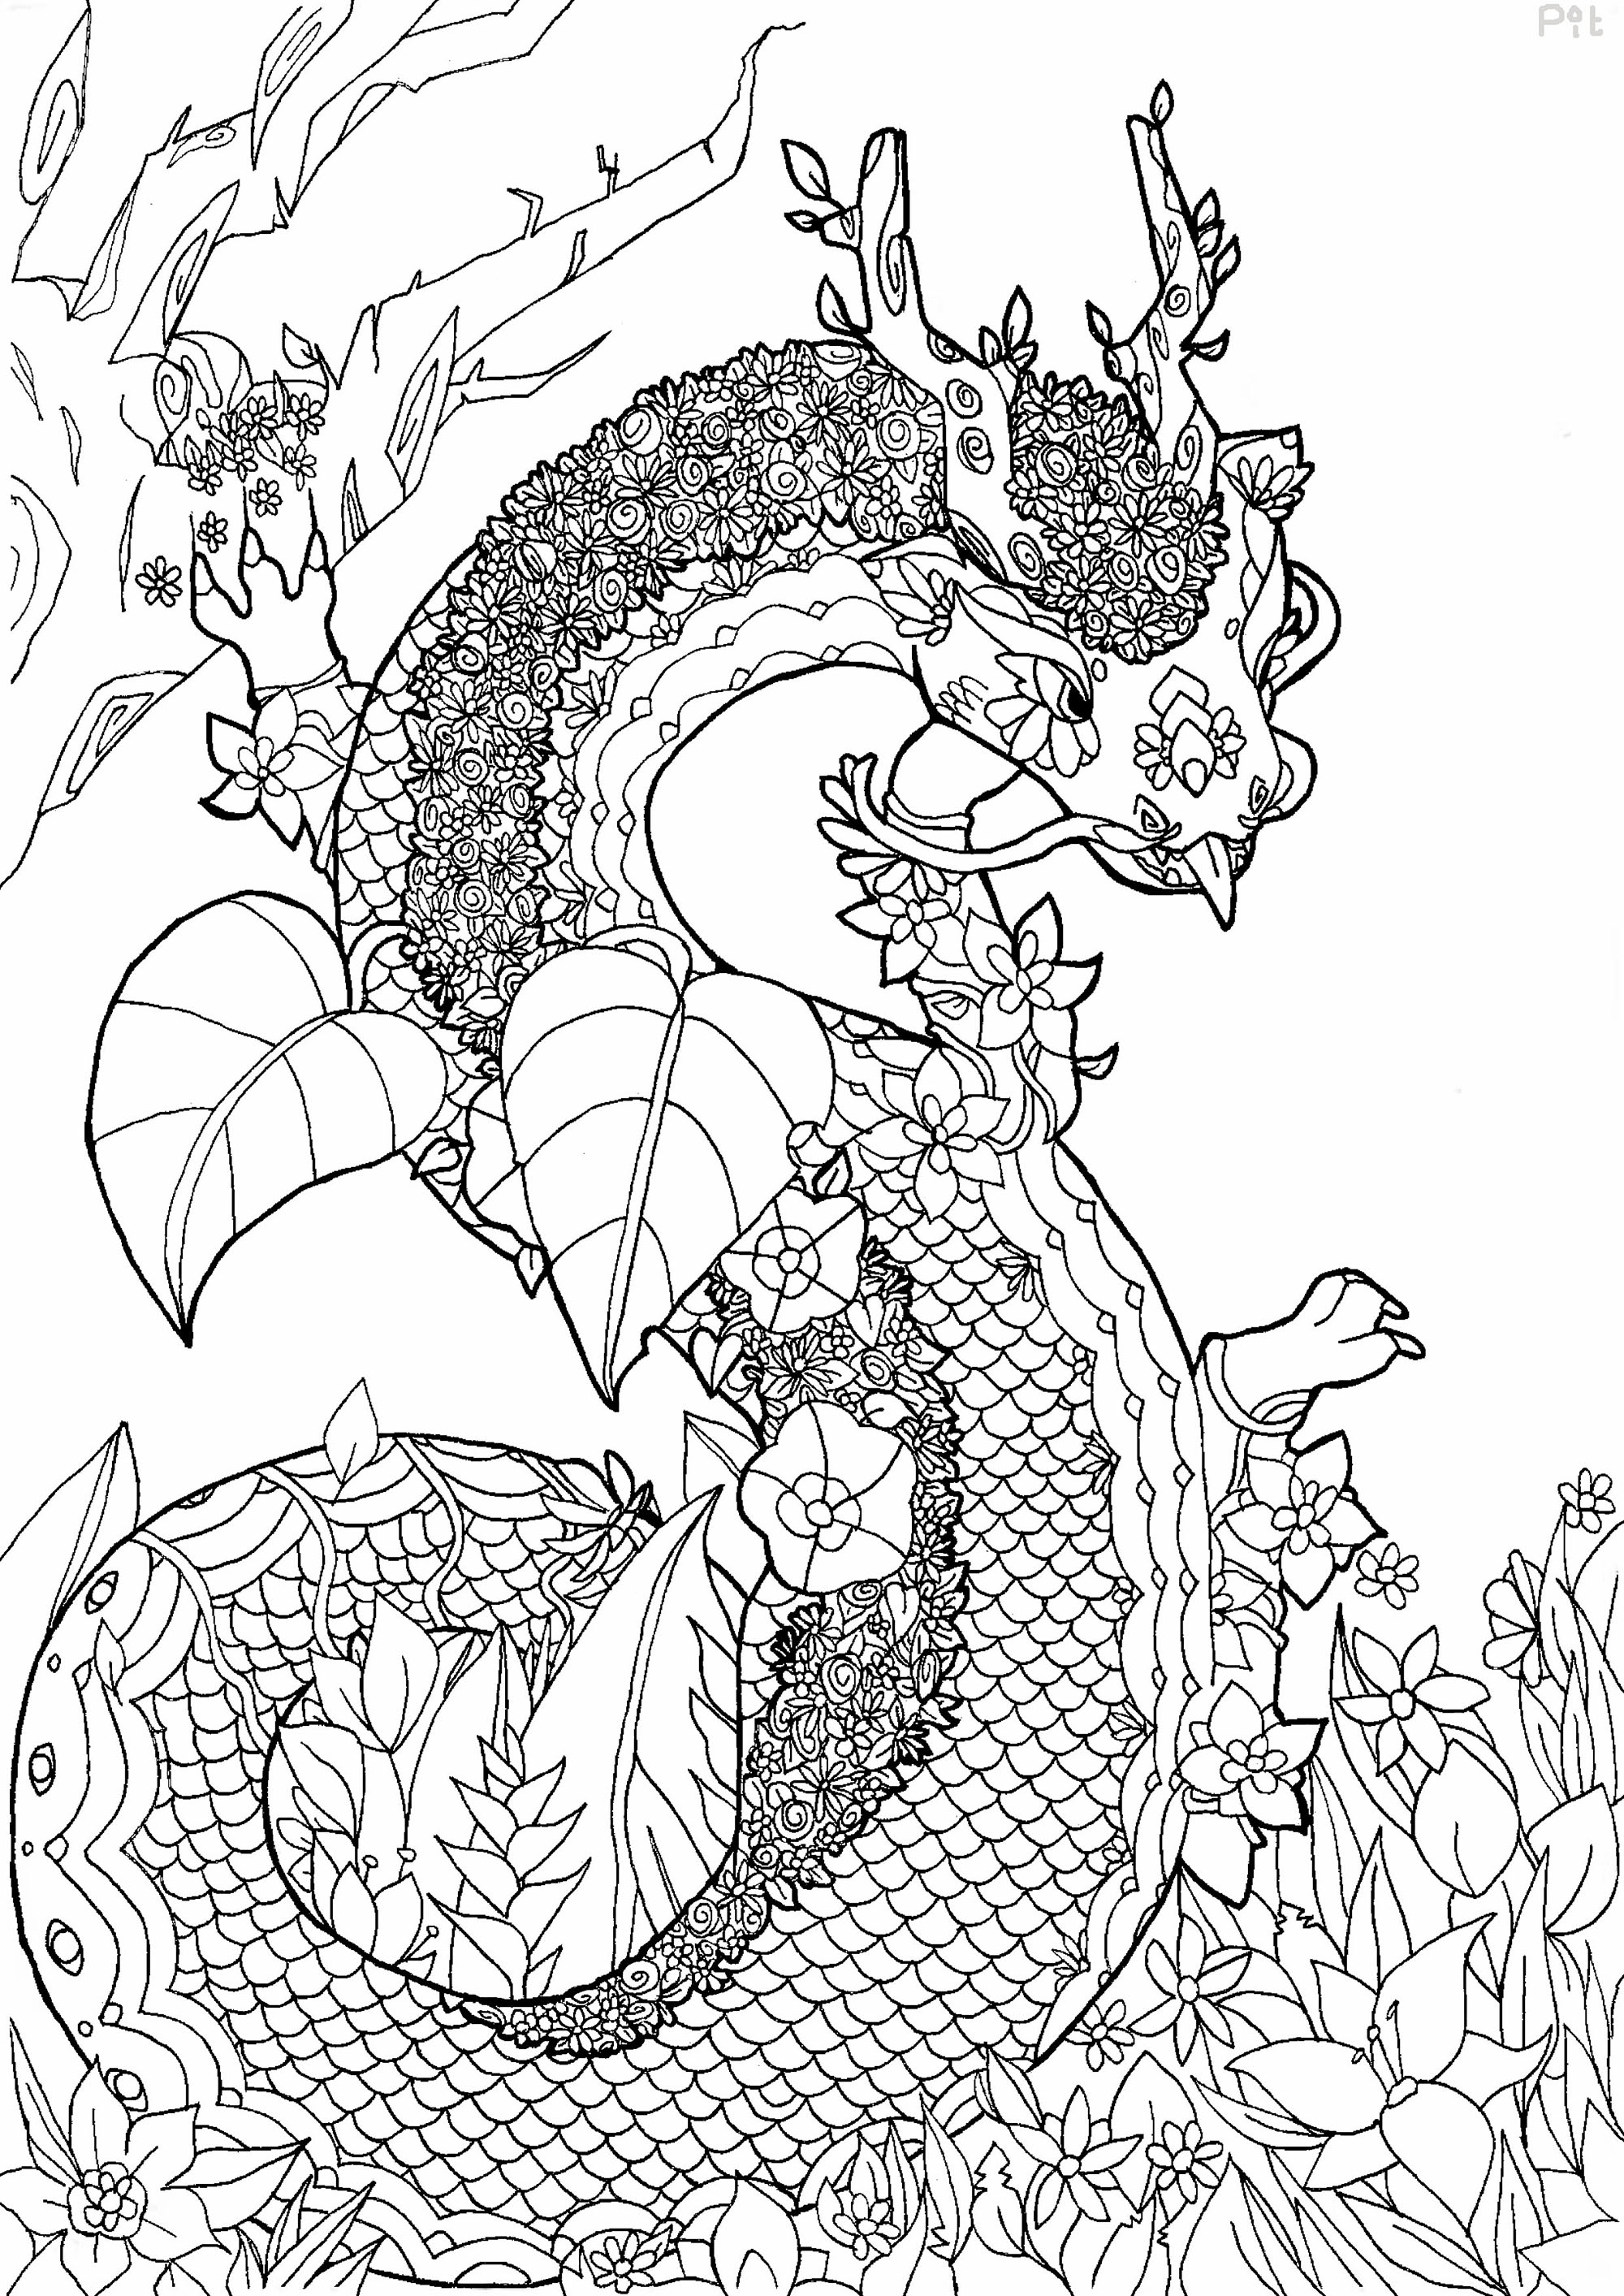 Dragon by pauline - Flowers Adult Coloring Pages